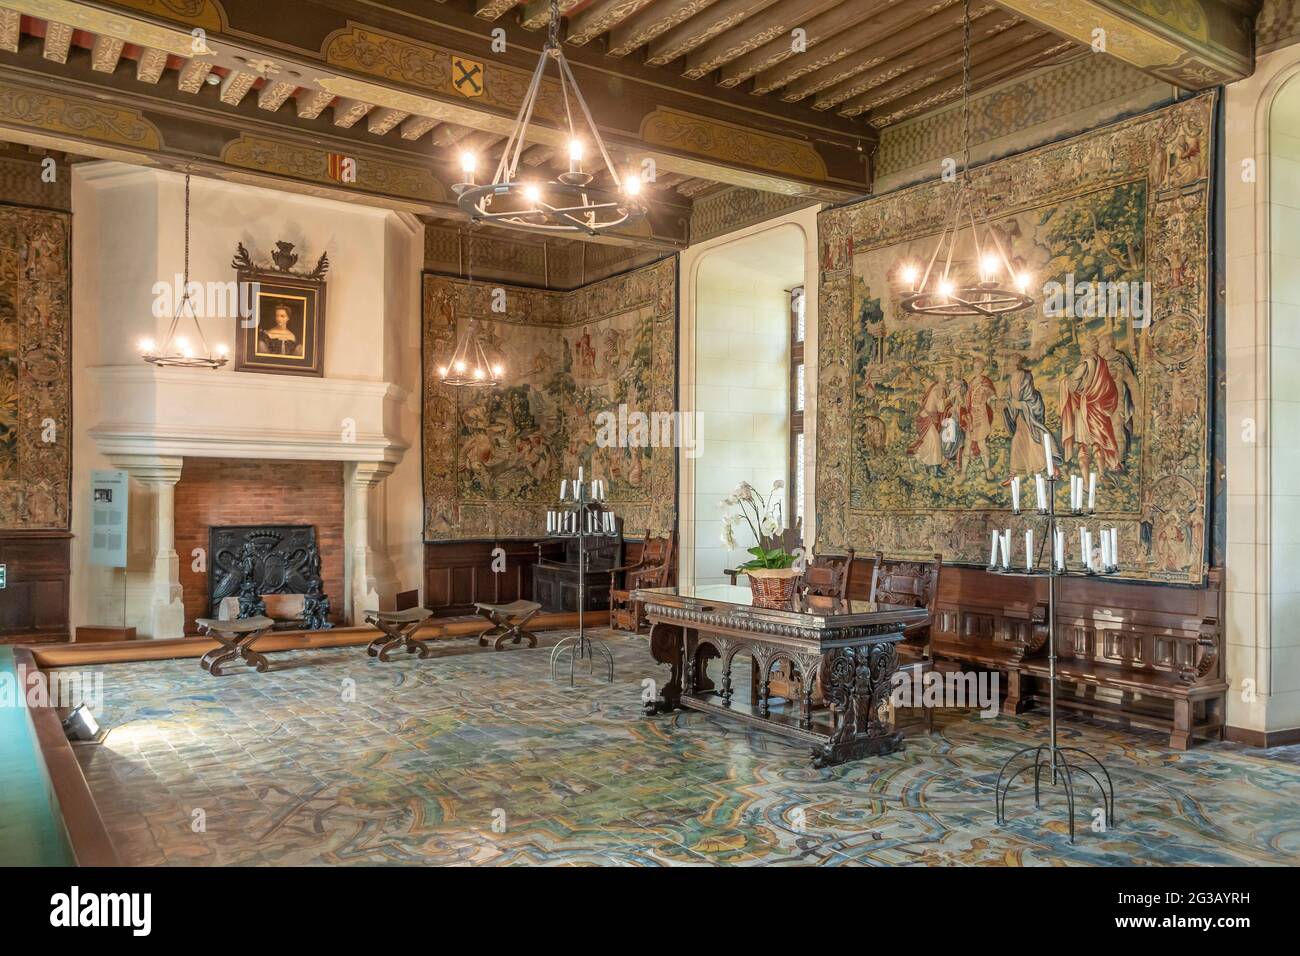 FRANCE - LOIRE VALLEY - LOIR ET CHER (41) - CASTLE OF CHAUMONT SUR LOIRE : THE COUNCIL ROOM, DECORATED WITH THE 'HANGING OF THE PLANET AND DAYS'. MADE Stock Photo